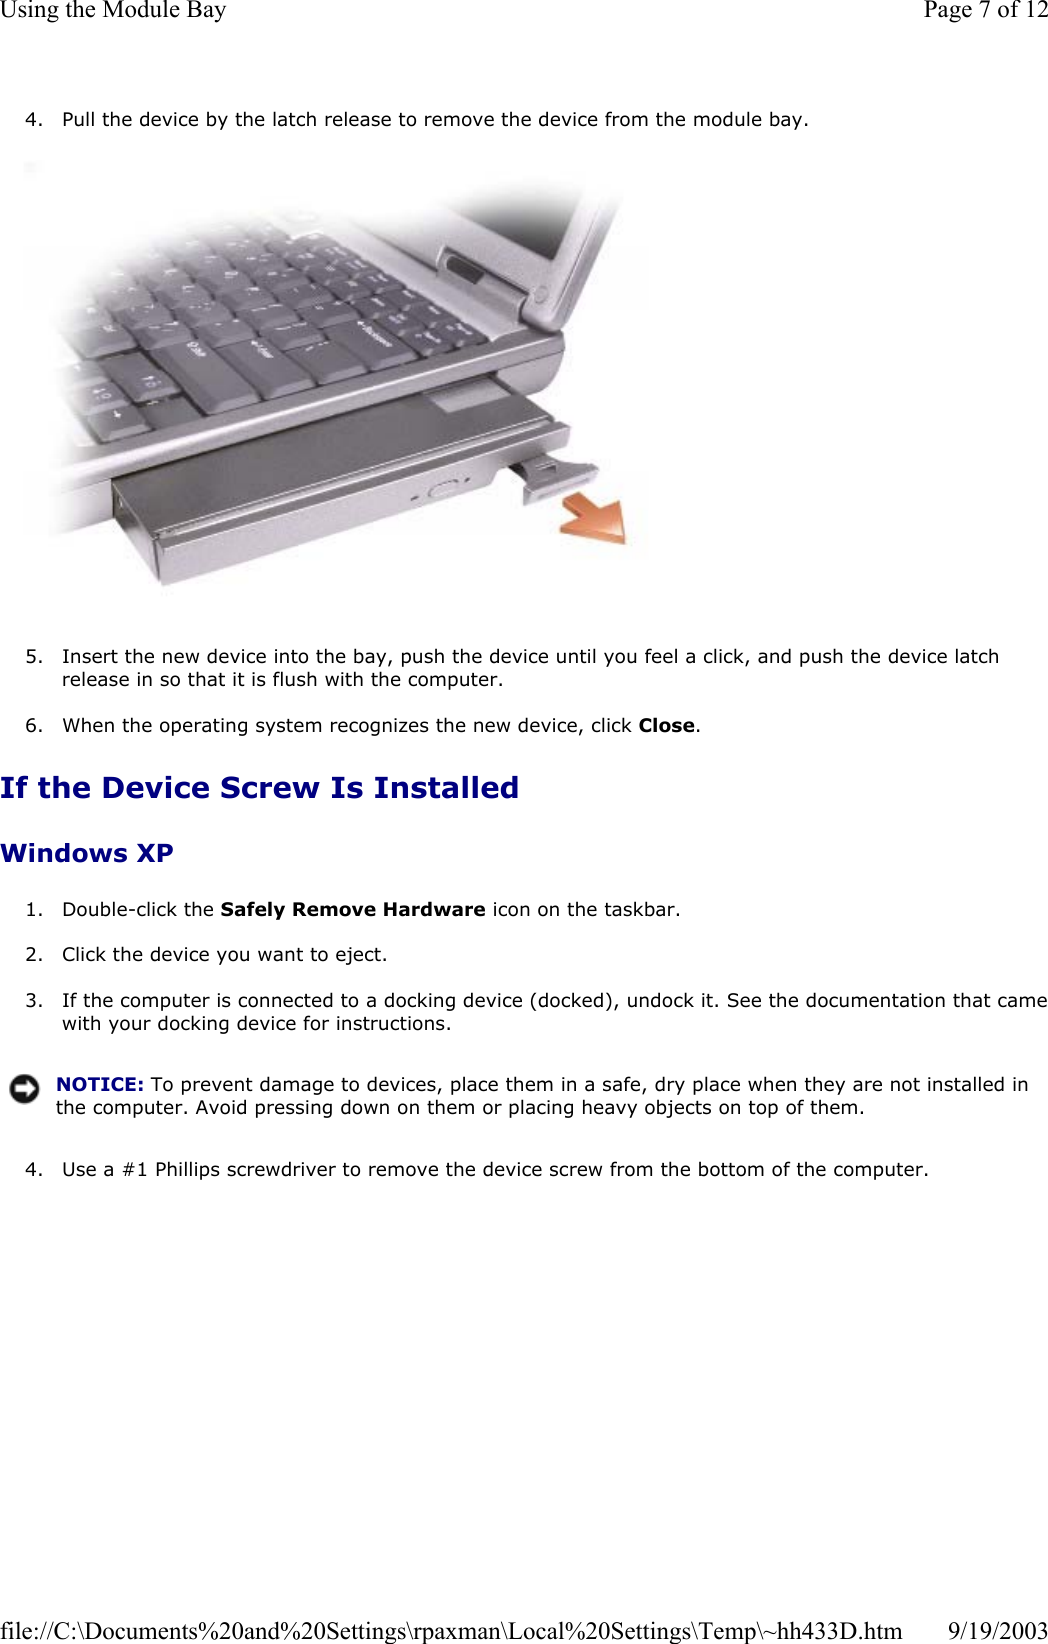 4. Pull the device by the latch release to remove the device from the module bay.    5. Insert the new device into the bay, push the device until you feel a click, and push the device latch release in so that it is flush with the computer.  6. When the operating system recognizes the new device, click Close.  If the Device Screw Is Installed Windows XP 1. Double-click the Safely Remove Hardware icon on the taskbar.  2. Click the device you want to eject.  3. If the computer is connected to a docking device (docked), undock it. See the documentation that camewith your docking device for instructions.  4. Use a #1 Phillips screwdriver to remove the device screw from the bottom of the computer.  NOTICE: To prevent damage to devices, place them in a safe, dry place when they are not installed in the computer. Avoid pressing down on them or placing heavy objects on top of them.Page 7 of 12Using the Module Bay9/19/2003file://C:\Documents%20and%20Settings\rpaxman\Local%20Settings\Temp\~hh433D.htm